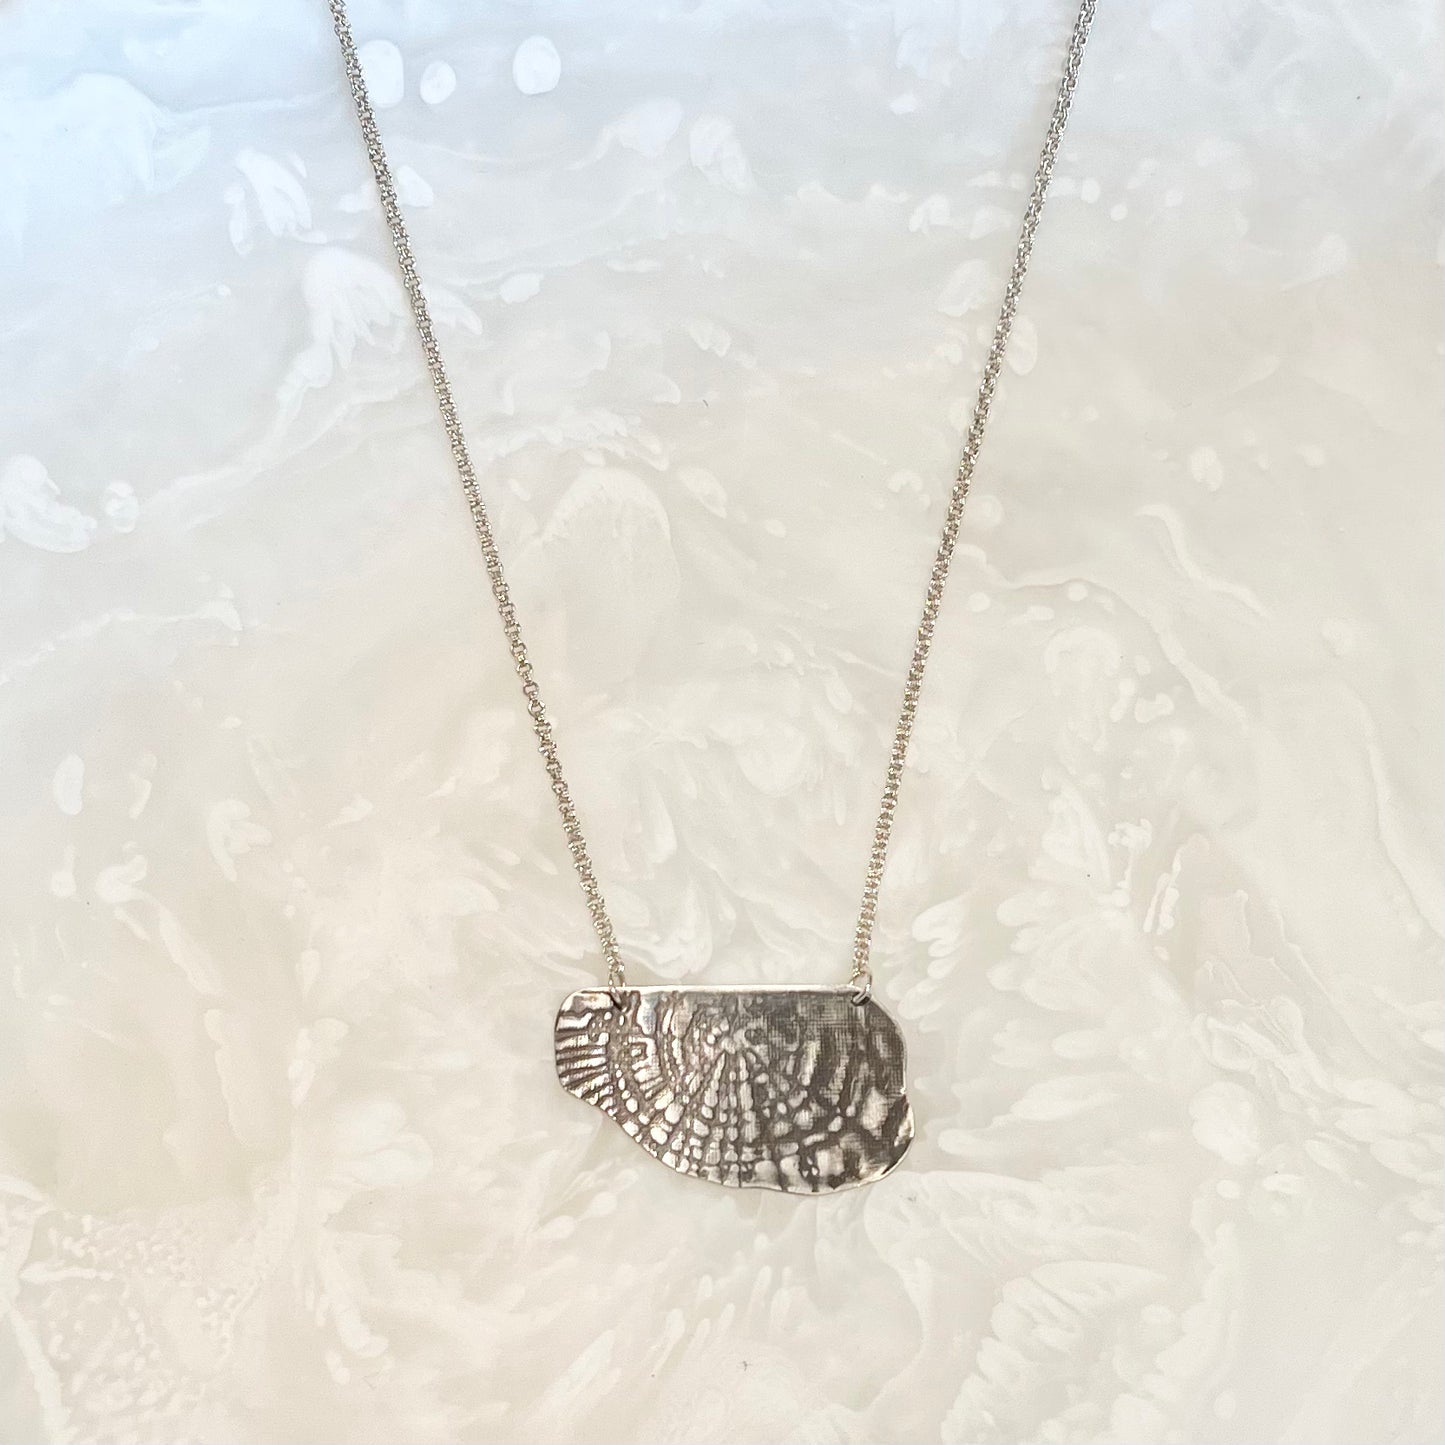 Sterling Silver + Oxidized Woodgrain Patterned Pendant Necklace